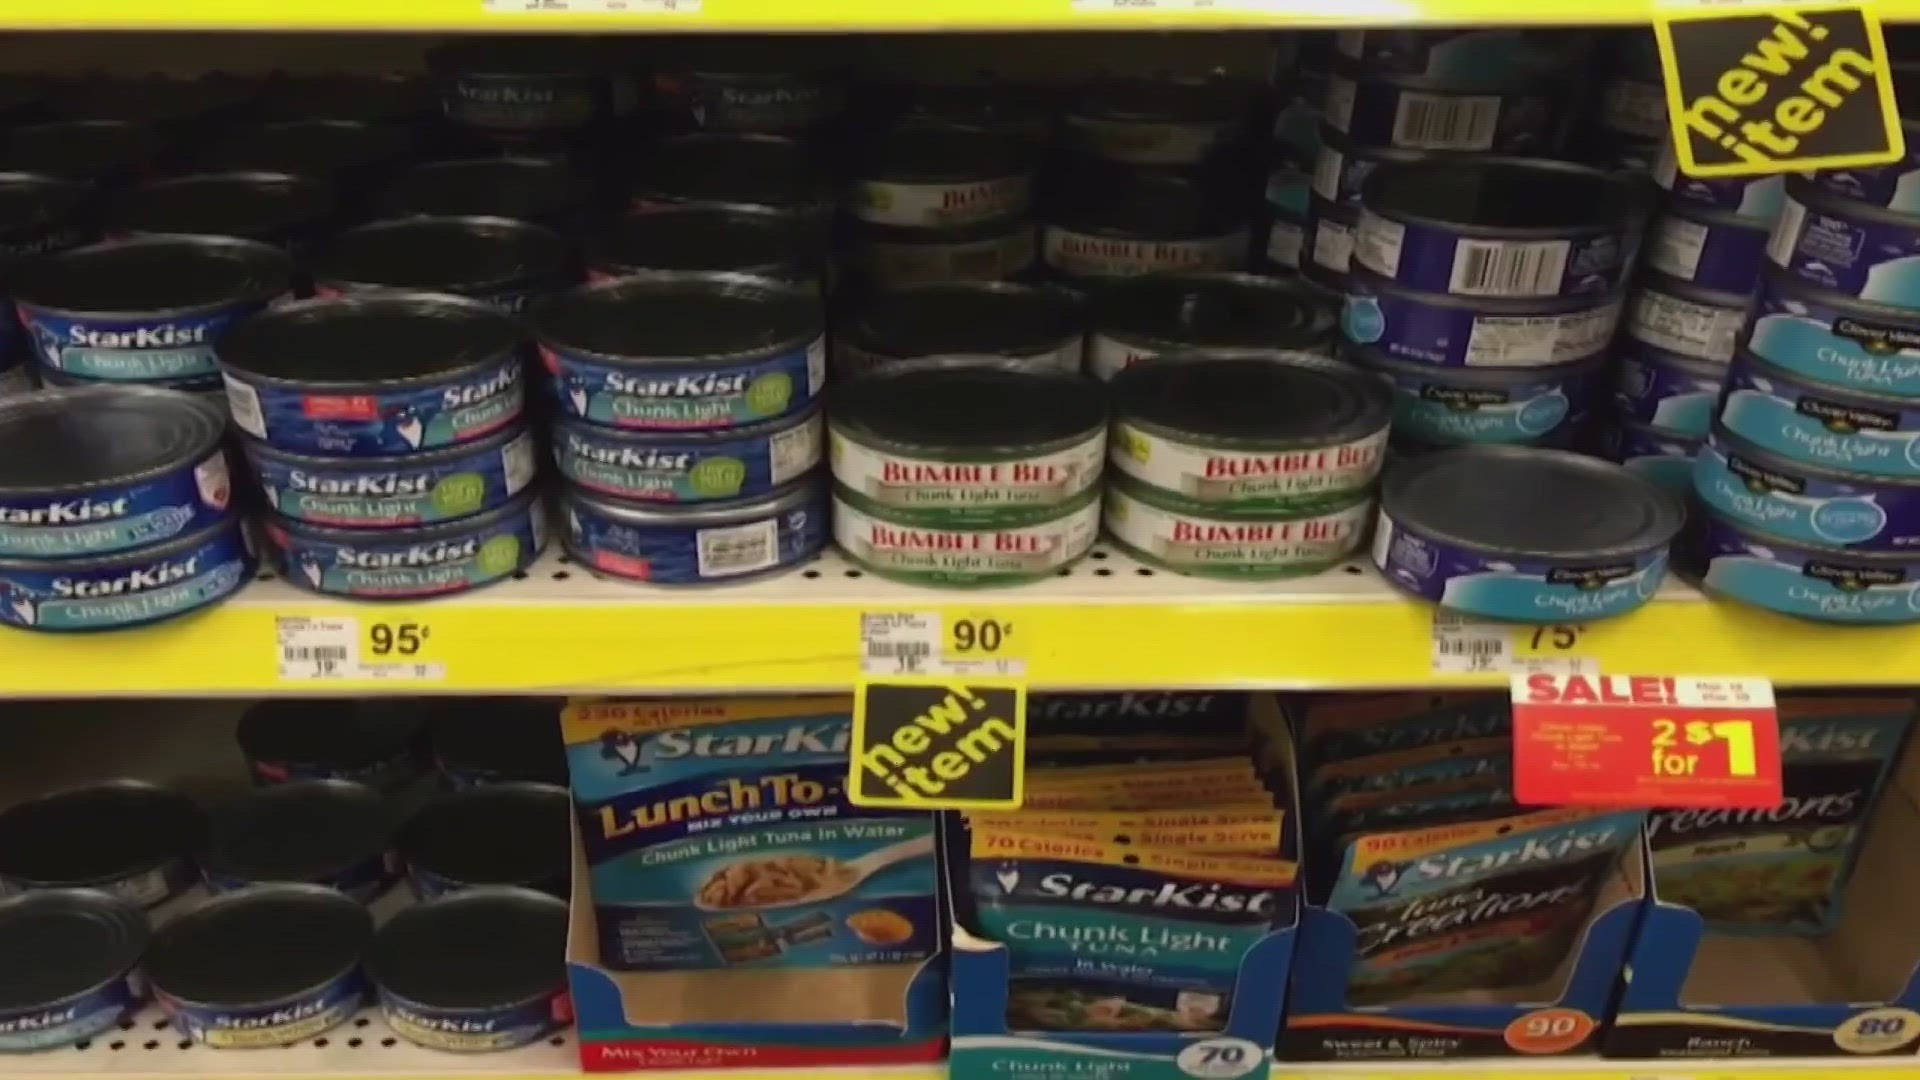 Seafood is part of a healthy diet, but some can contain mercury. Consumer Reports tested a wide variety of canned tuna to see which is the safest.